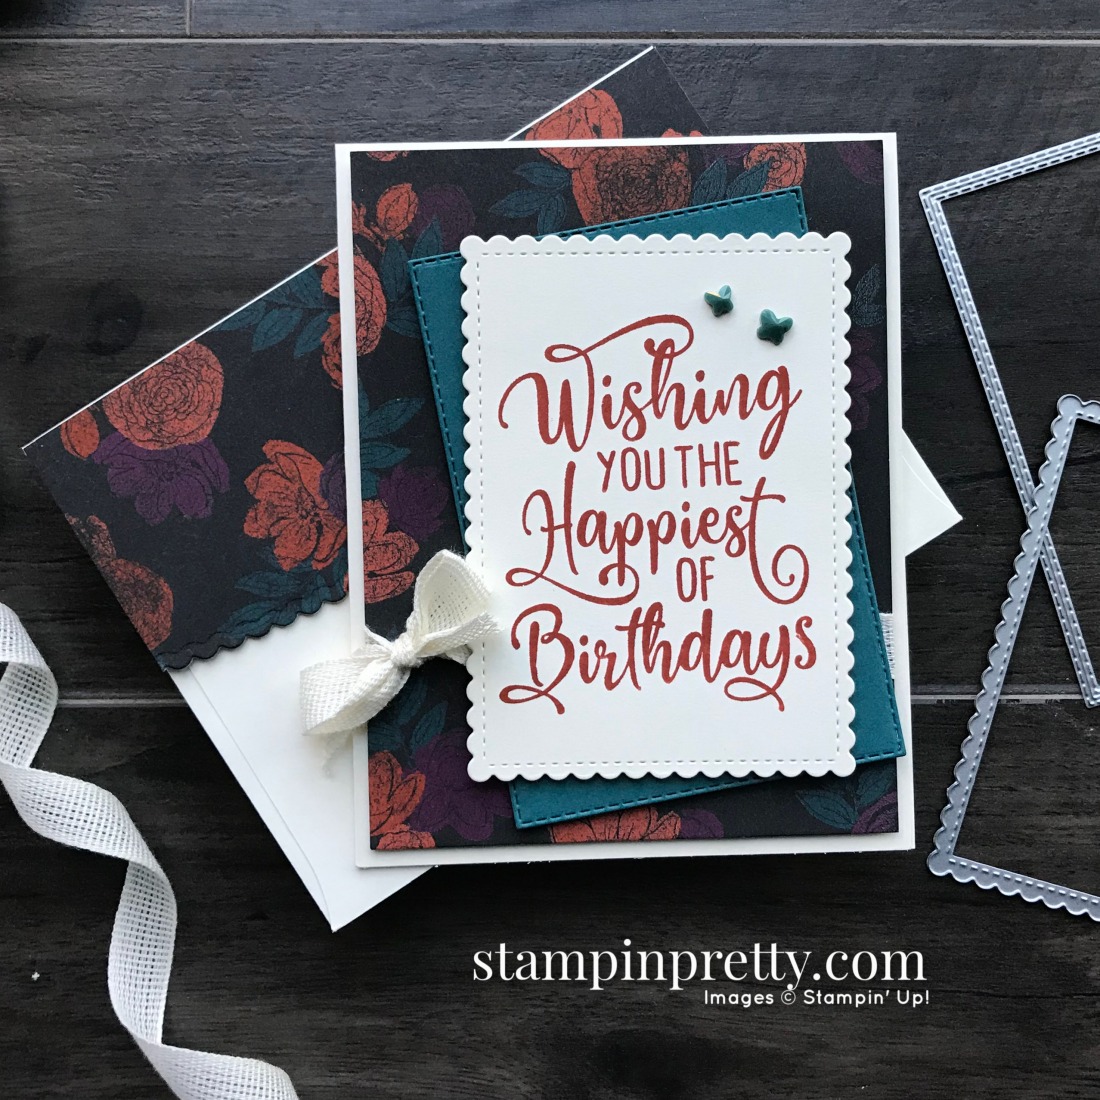 Create this card using the Happiest of Birthdays Stamp Set by Stampin' Up! Card by Mary Fish, Stampin' Pretty